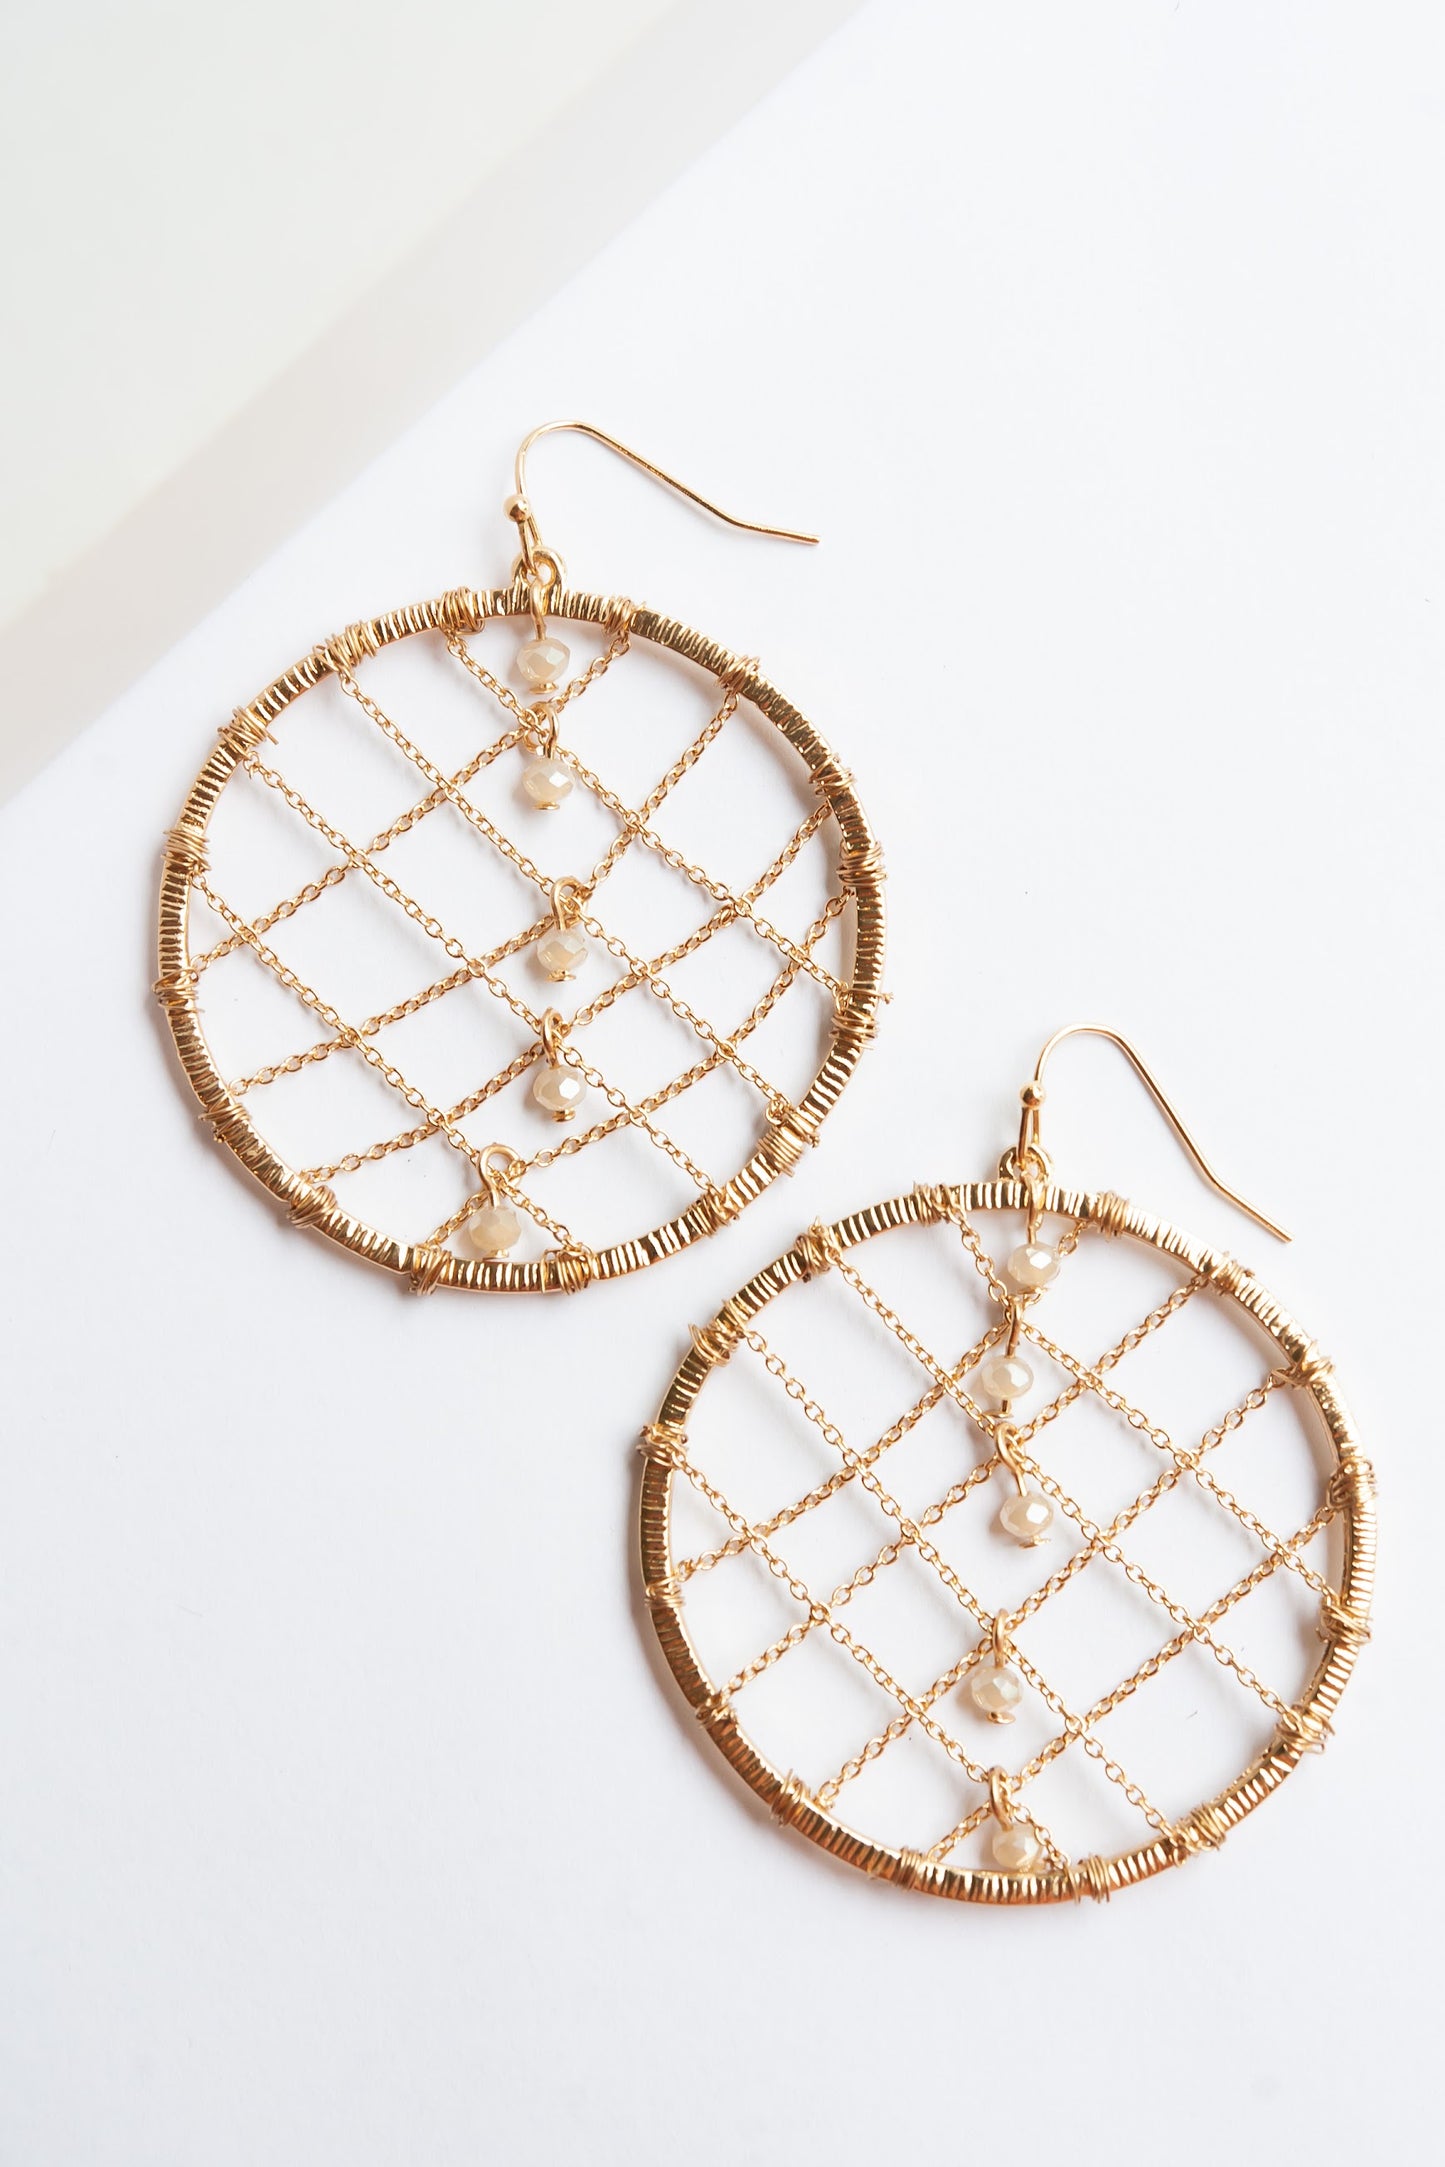 Load image into Gallery viewer, Sorchia Gold Moroccan Hoop Earrings | Exotic Intricate Chain Hoops | Delicate Pearl Charm Details
